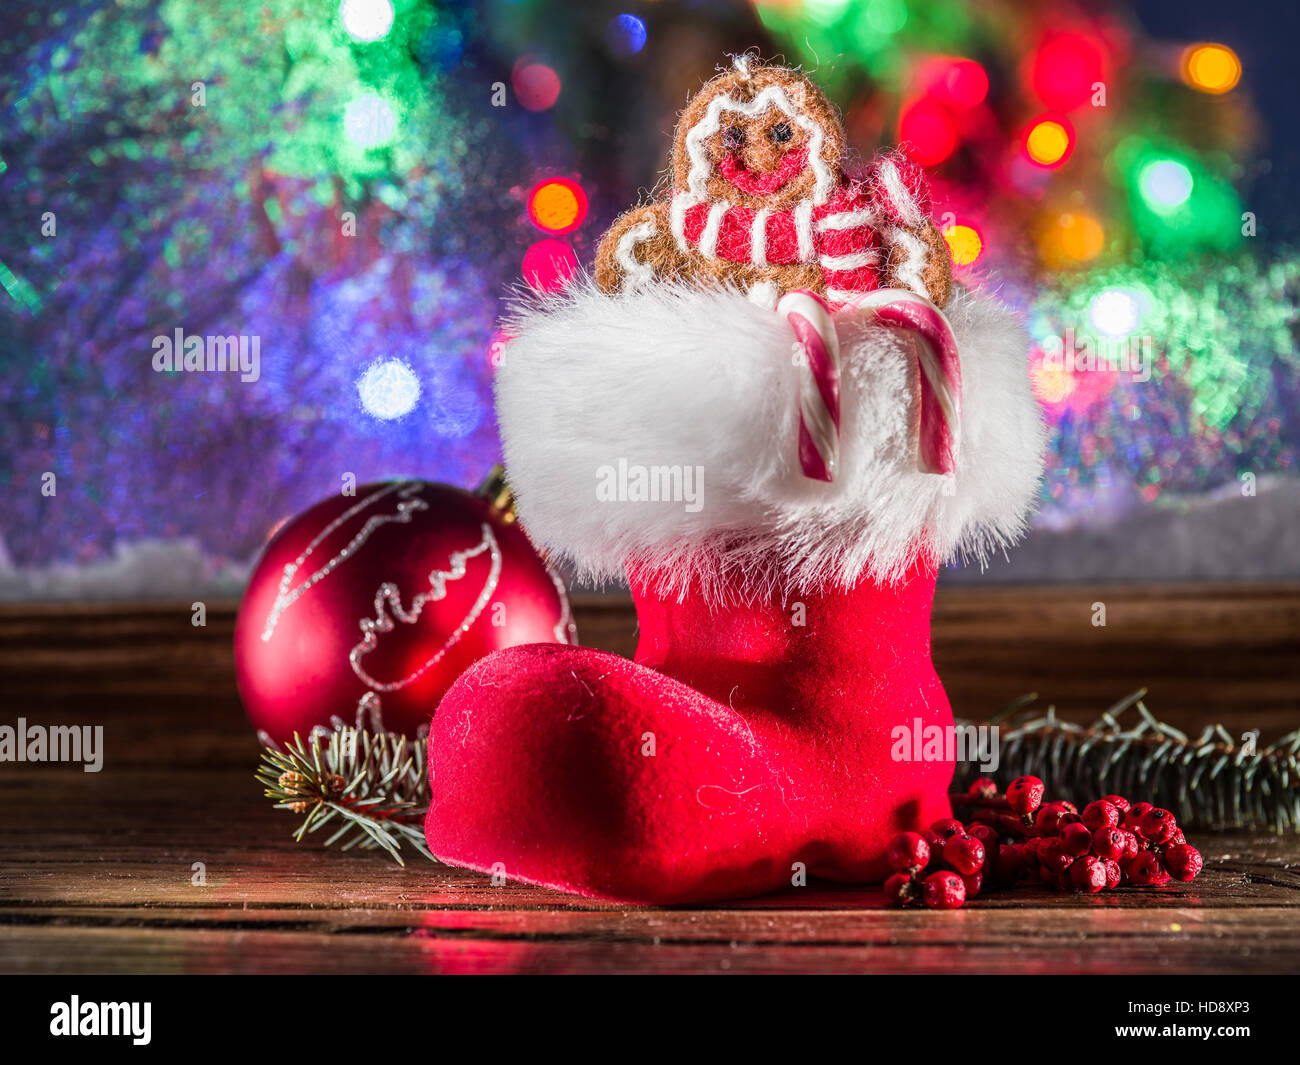 Christmas stocking, toy ginger man and candy canes. Christmas symbols. Stock Photo